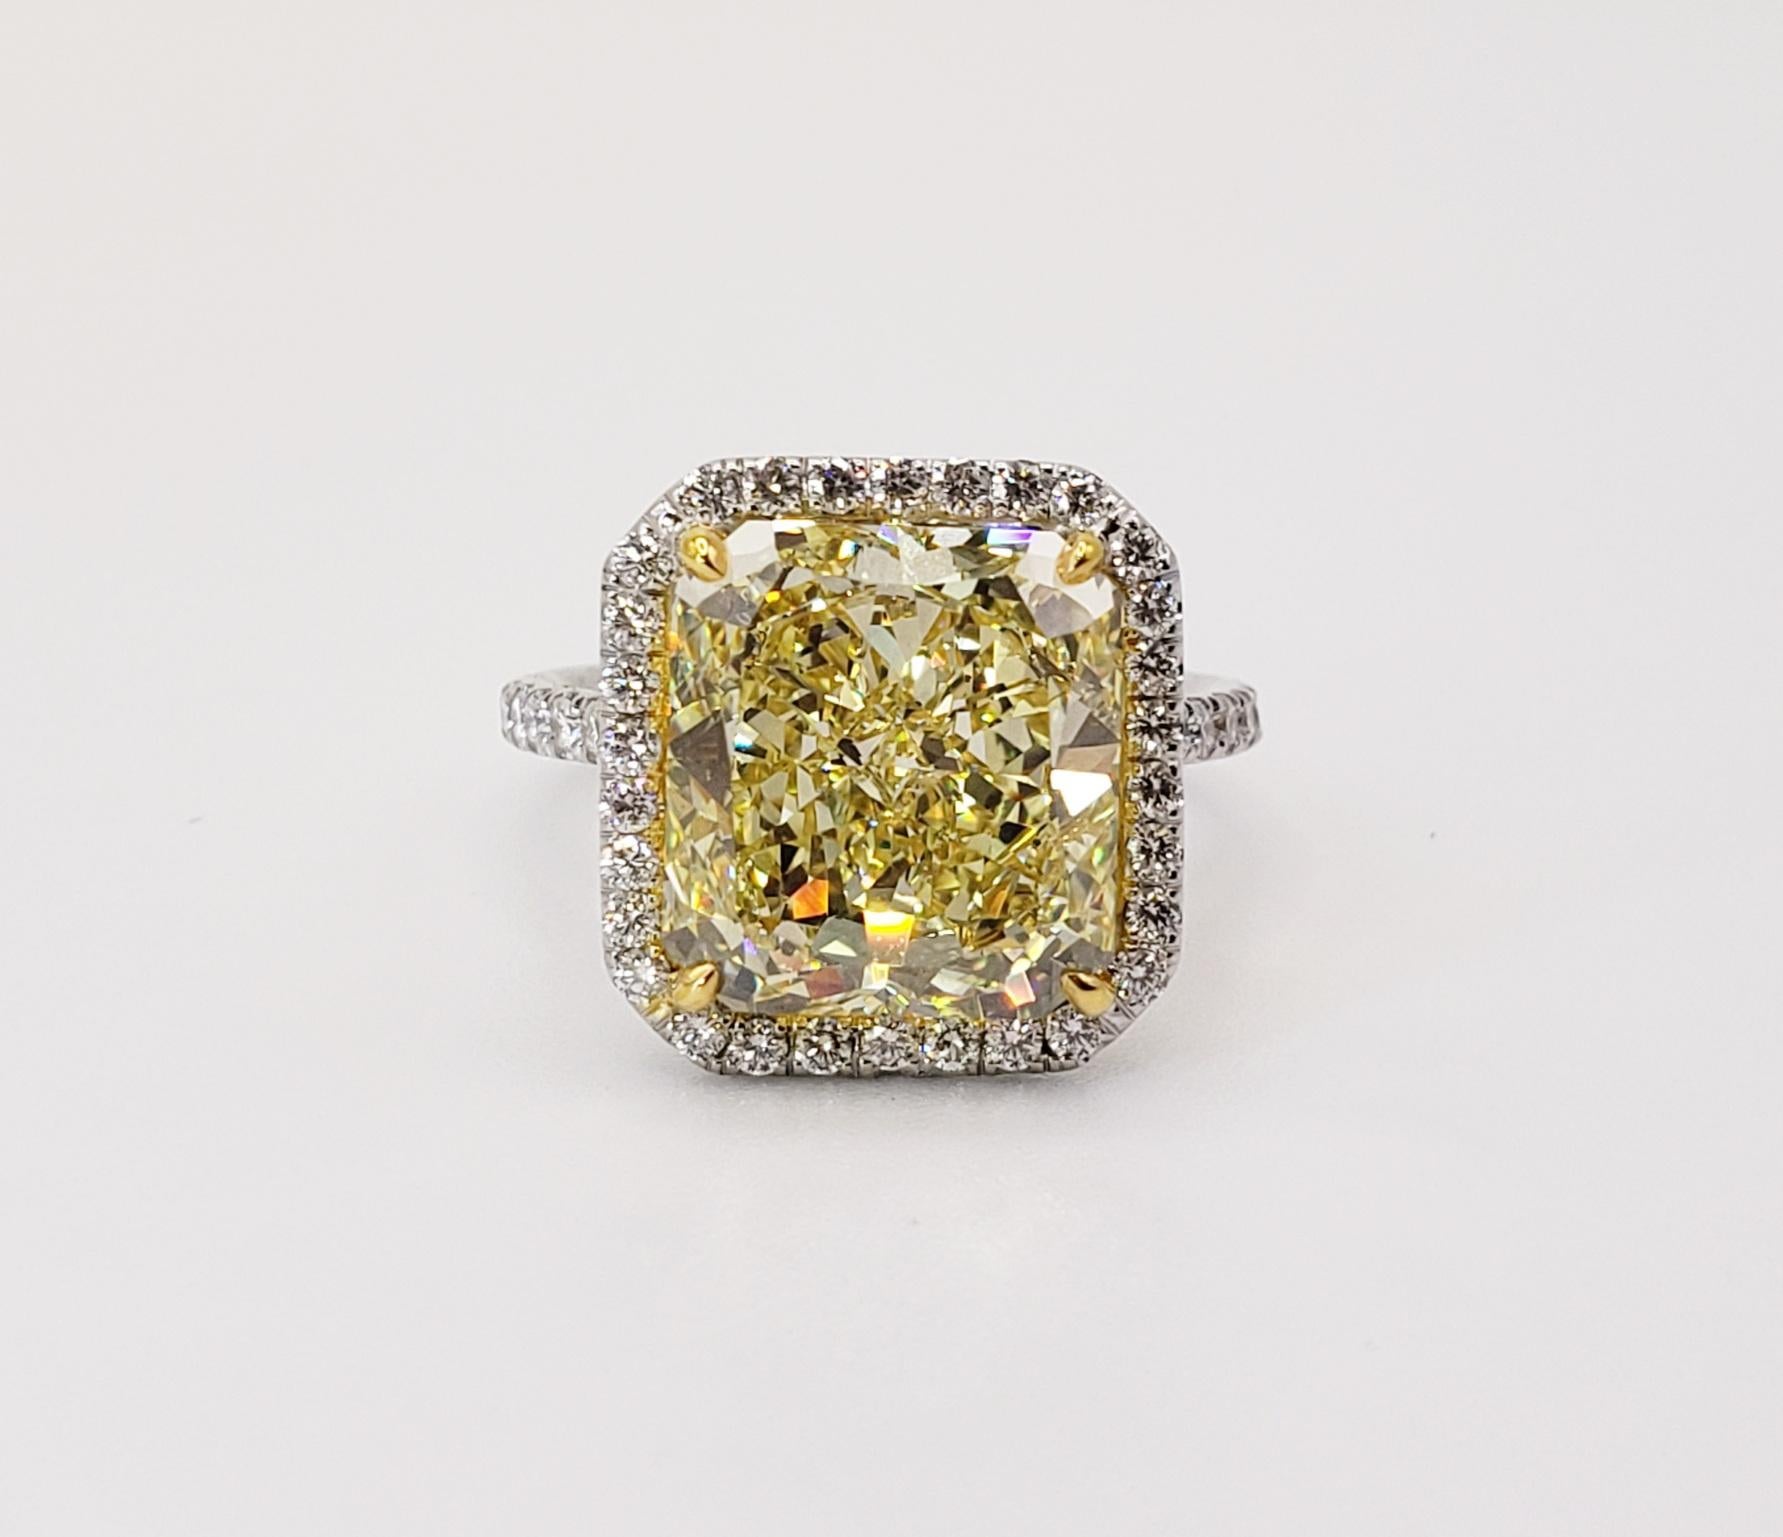 Rosenberg Diamonds & Co. 6.02 carat Radiant cut Fancy Yellow VS2 clarity is accompanied by a GIA certificate. This striking Radiant is full of brilliance and it is set in a handmade 18 karat white and yellow gold setting. This ring completes its